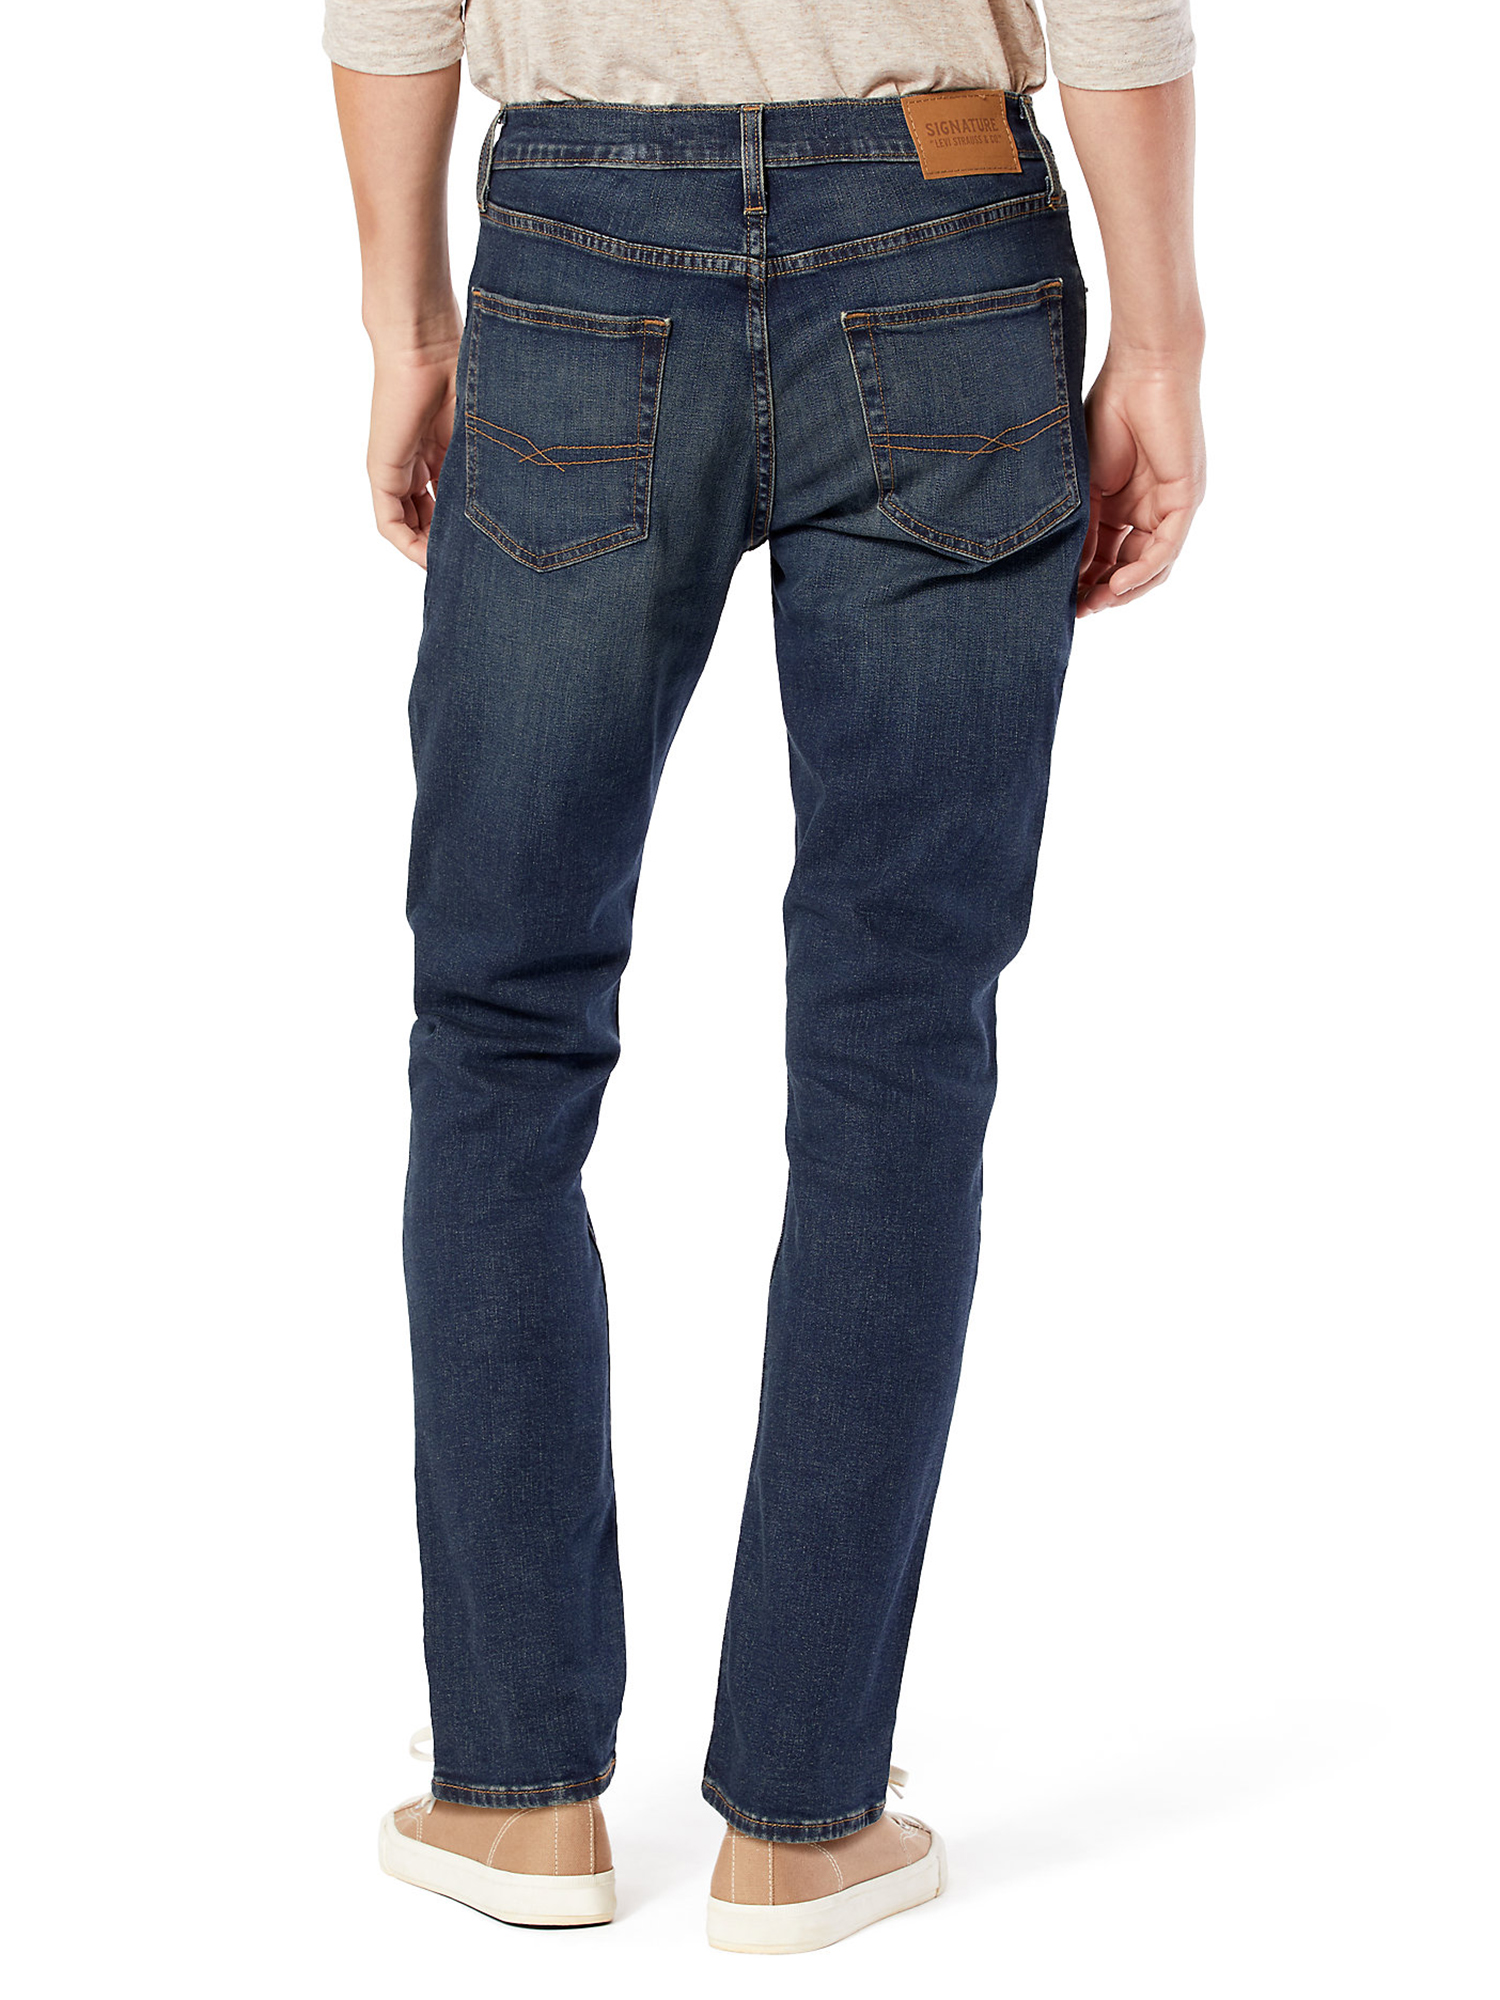 Signature by Levi Strauss & Co. Men's and Big Men's Slim Fit Jeans - image 3 of 5